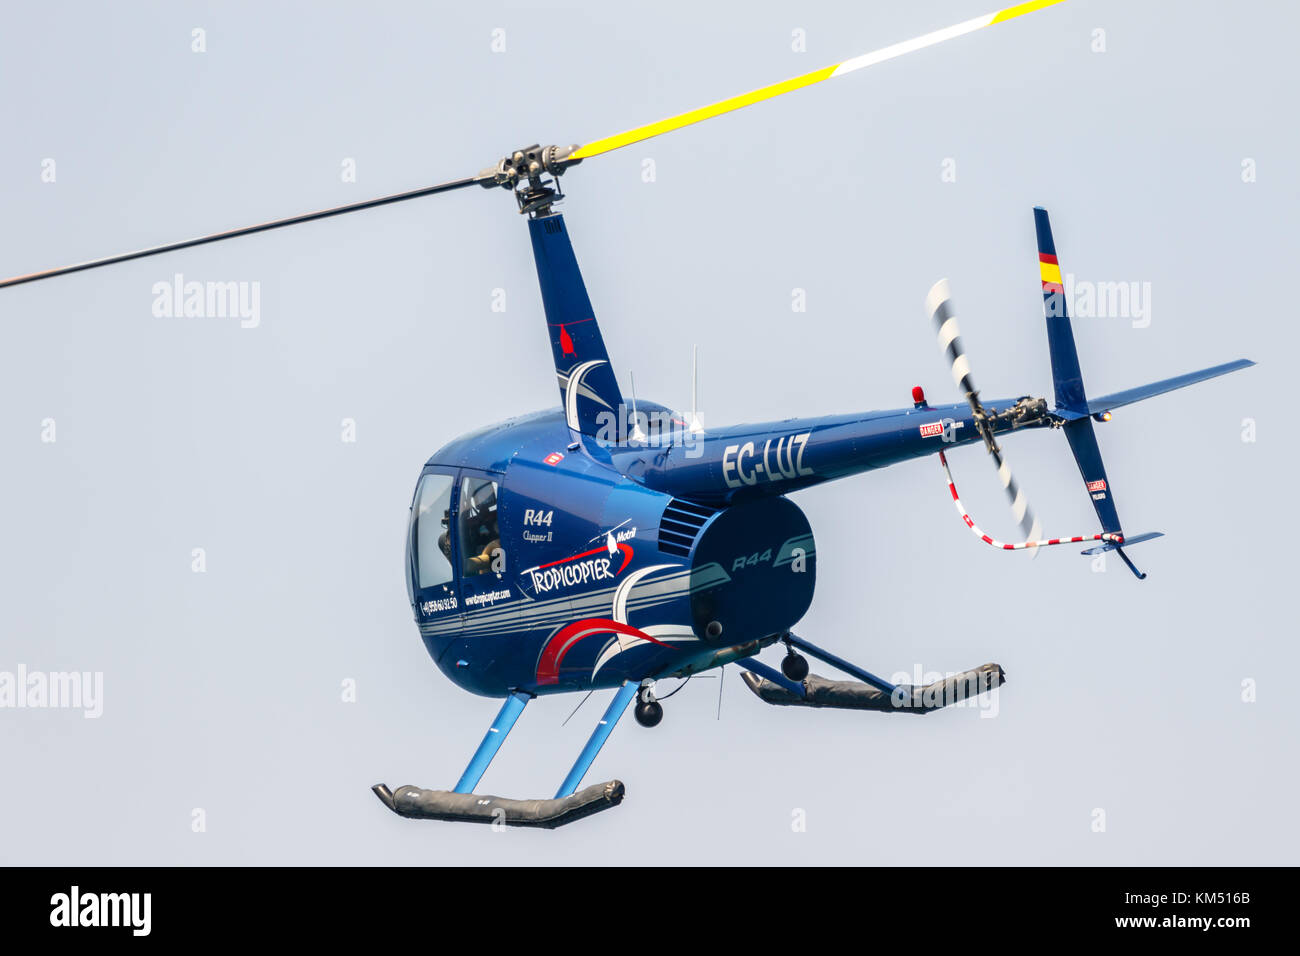 MOTRIL, GRANADA, SPAIN-JUN 11: Helicopter Robinson R44 taking part in an exhibition on the 12th international airshow of Motril on Jun 11, 2017, in Mo Stock Photo